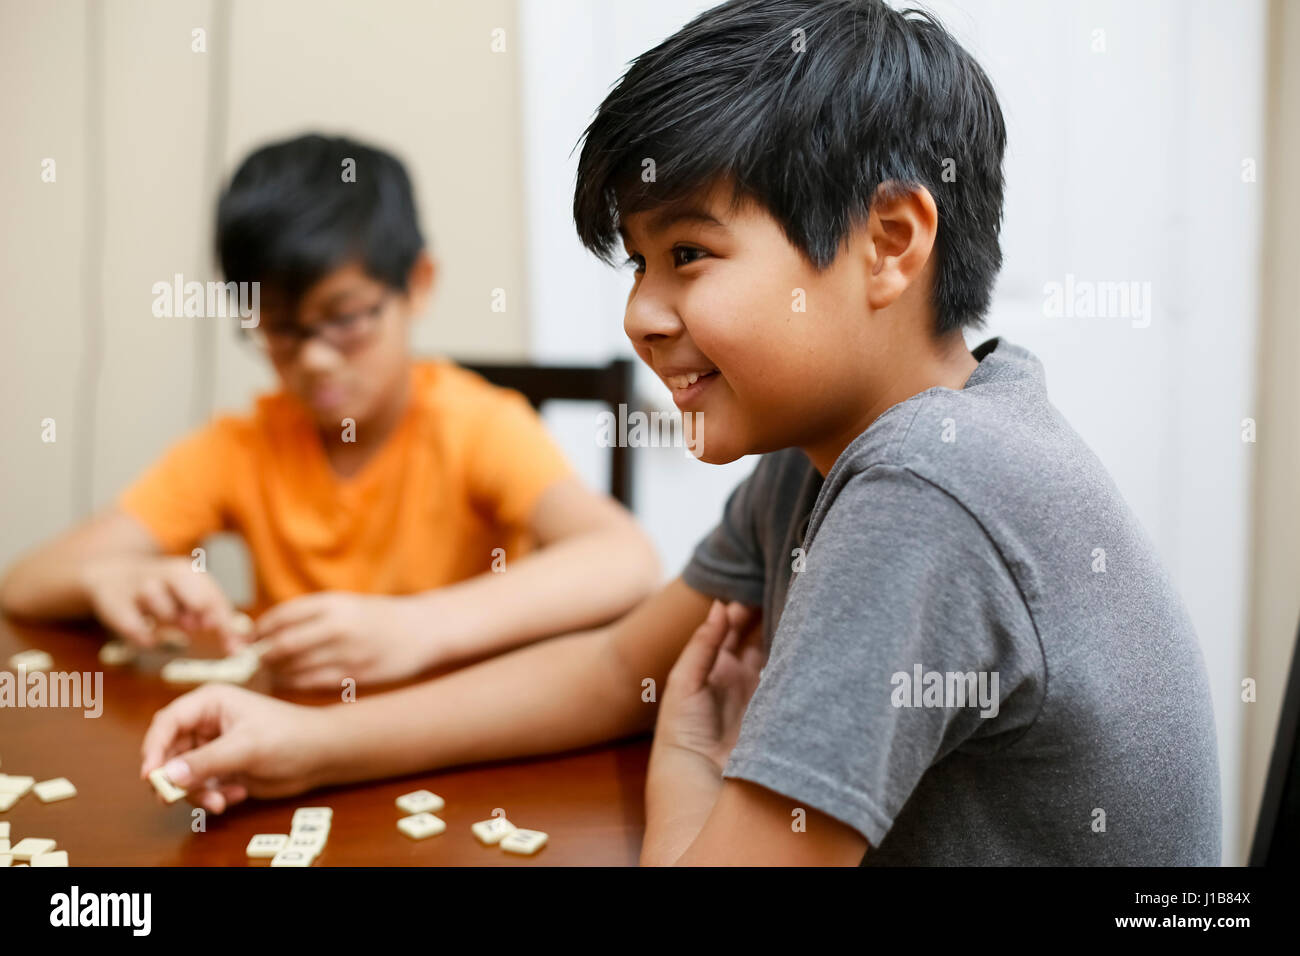 Native American boys playing spelling game at table Stock Photo